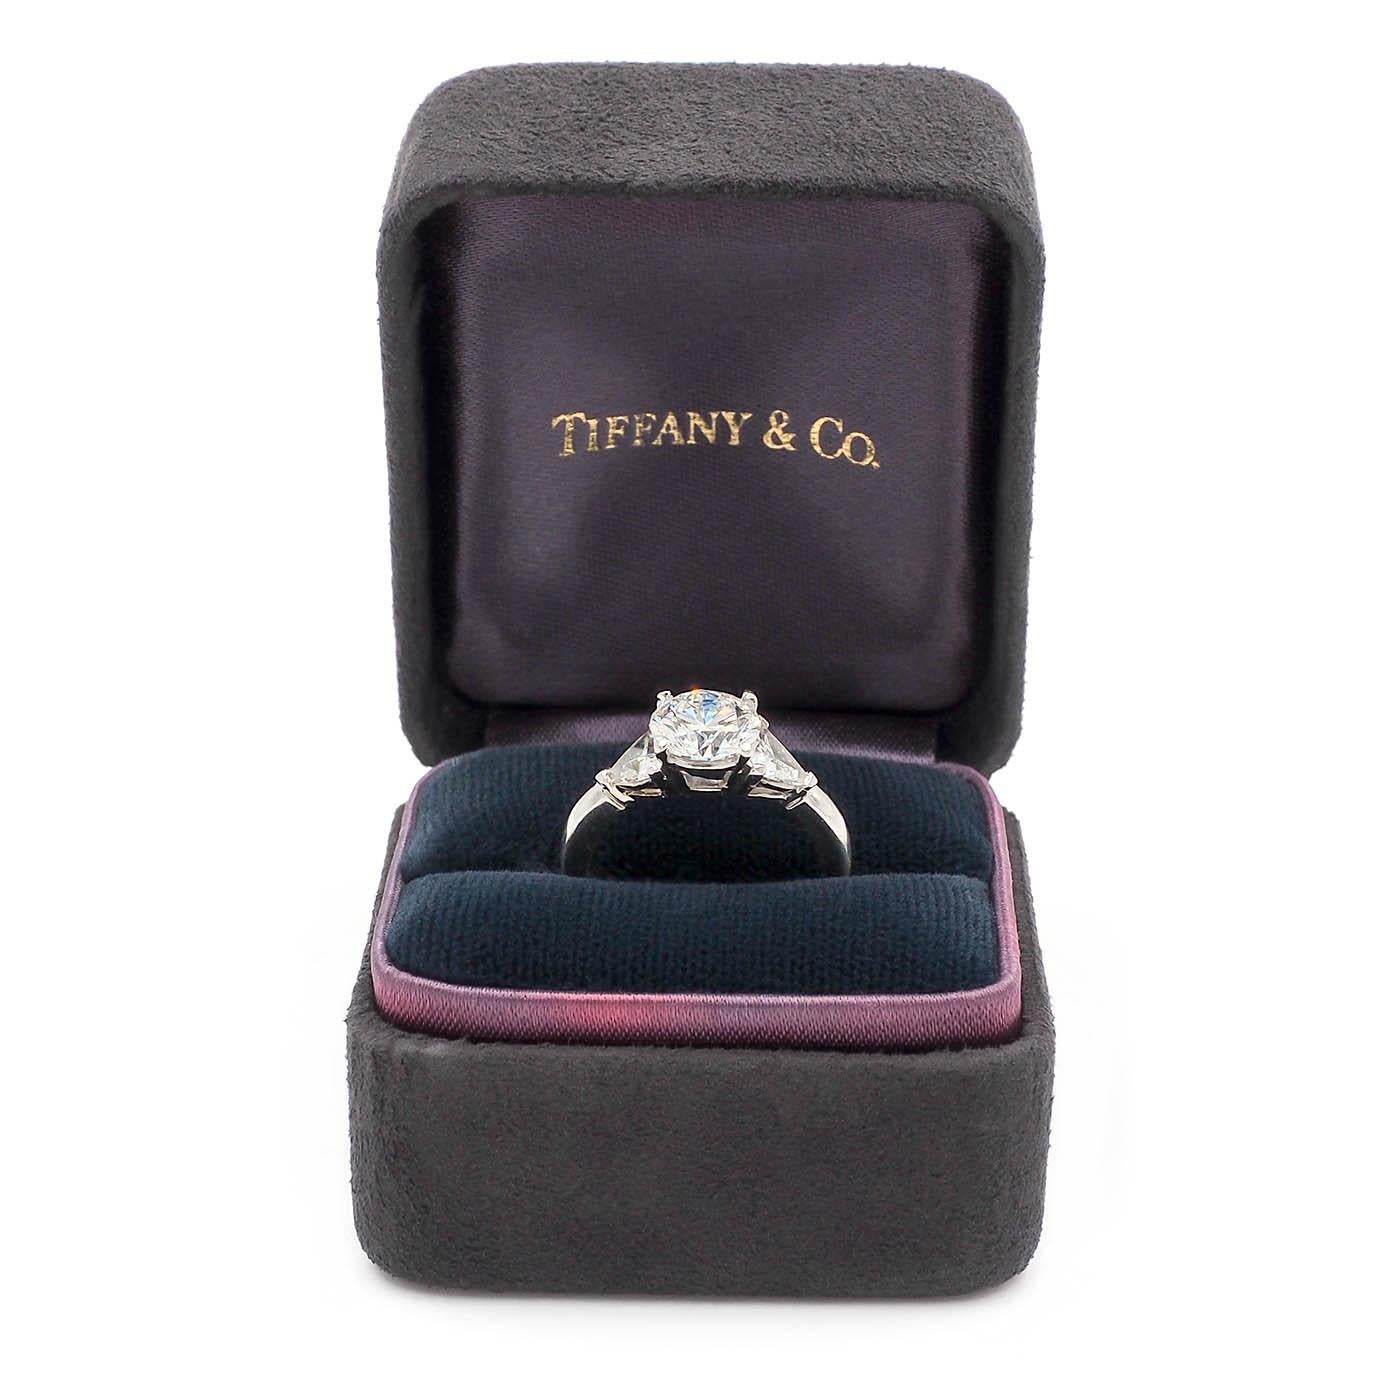 Contemporary 1.31 Carat GIA Round Brilliant Cut Diamond Engagement Ring by Tiffany & Co.